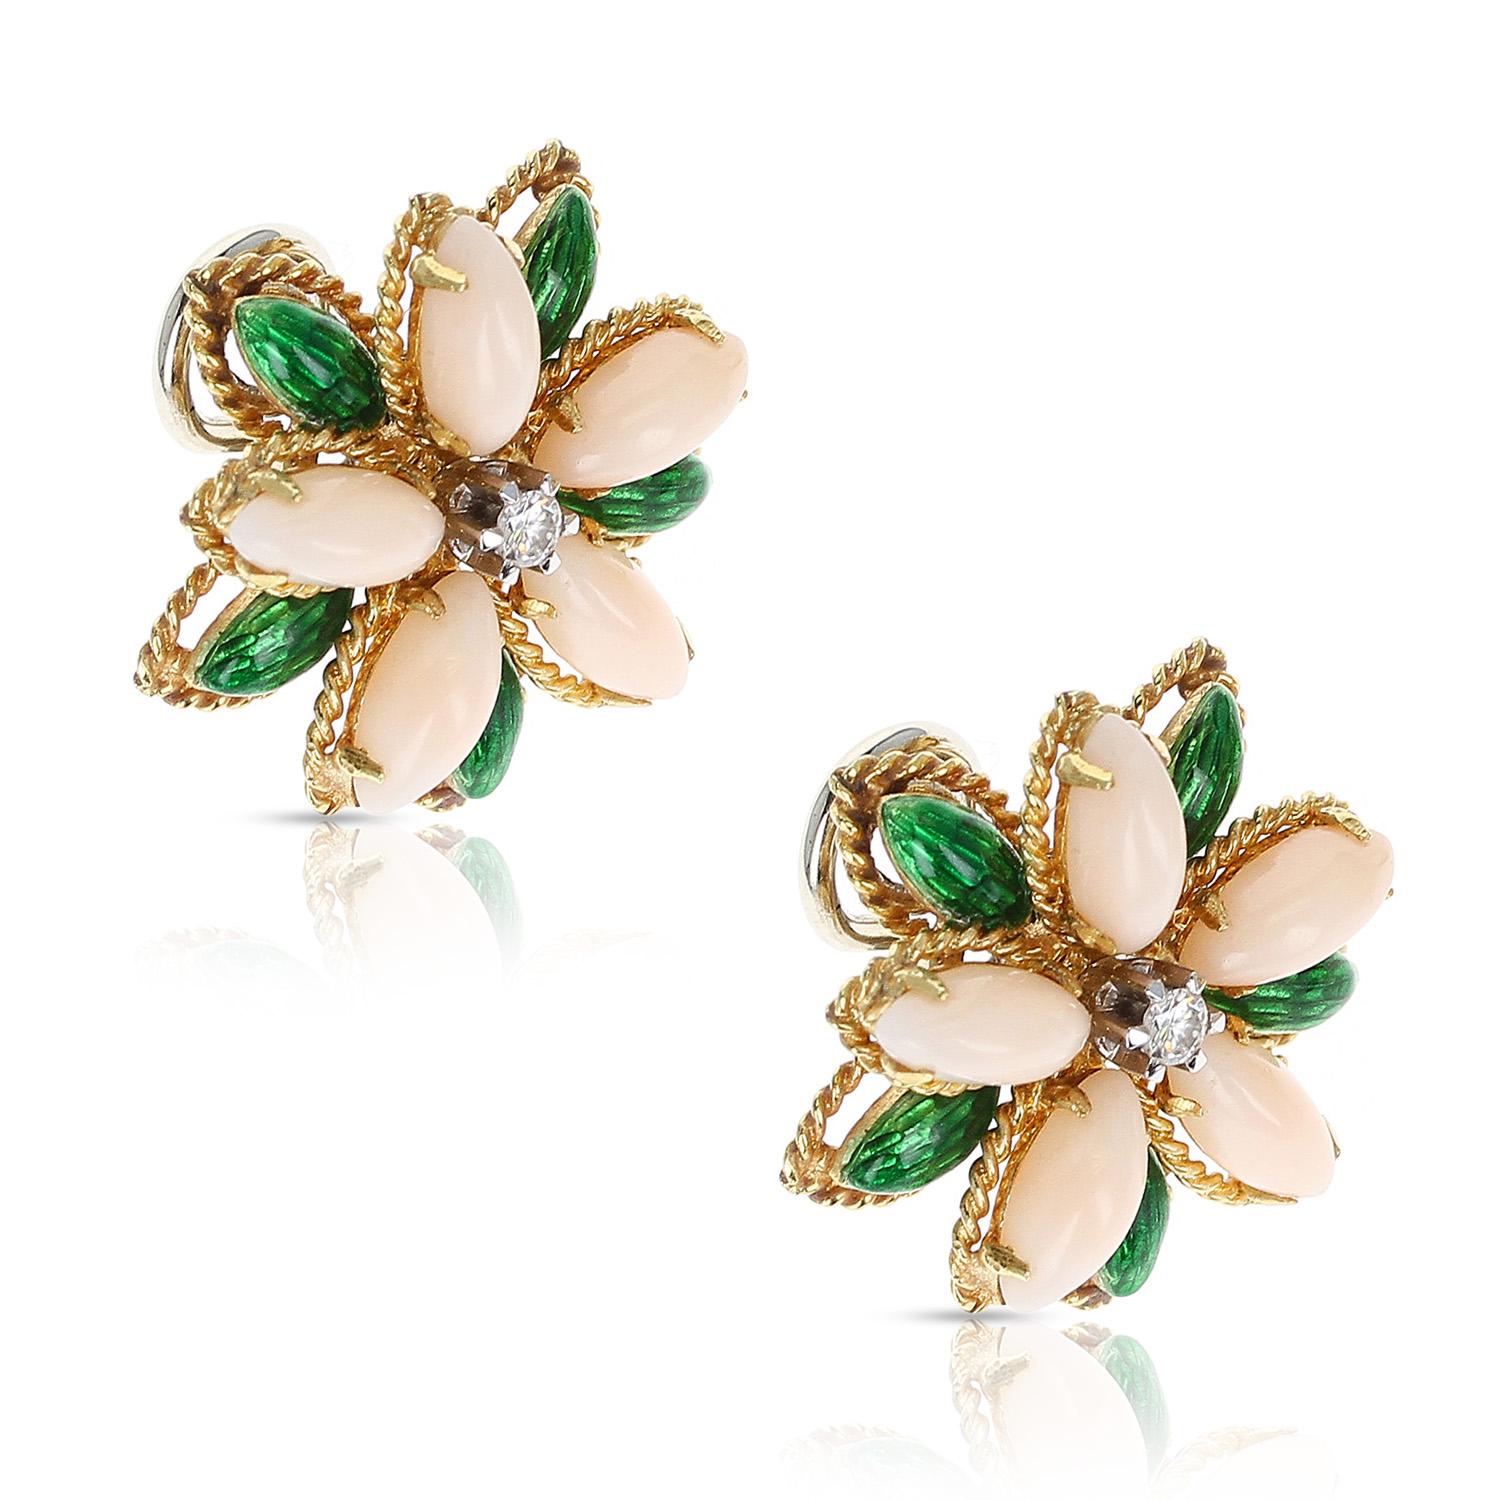 A beautiful pair of Coral, Green Enamel, and Diamond Floral Earrings made in 18 Karat Yellow Gold. Total Weight: 17.78 grams. Clip-ons, Length: 1 Inch. 
